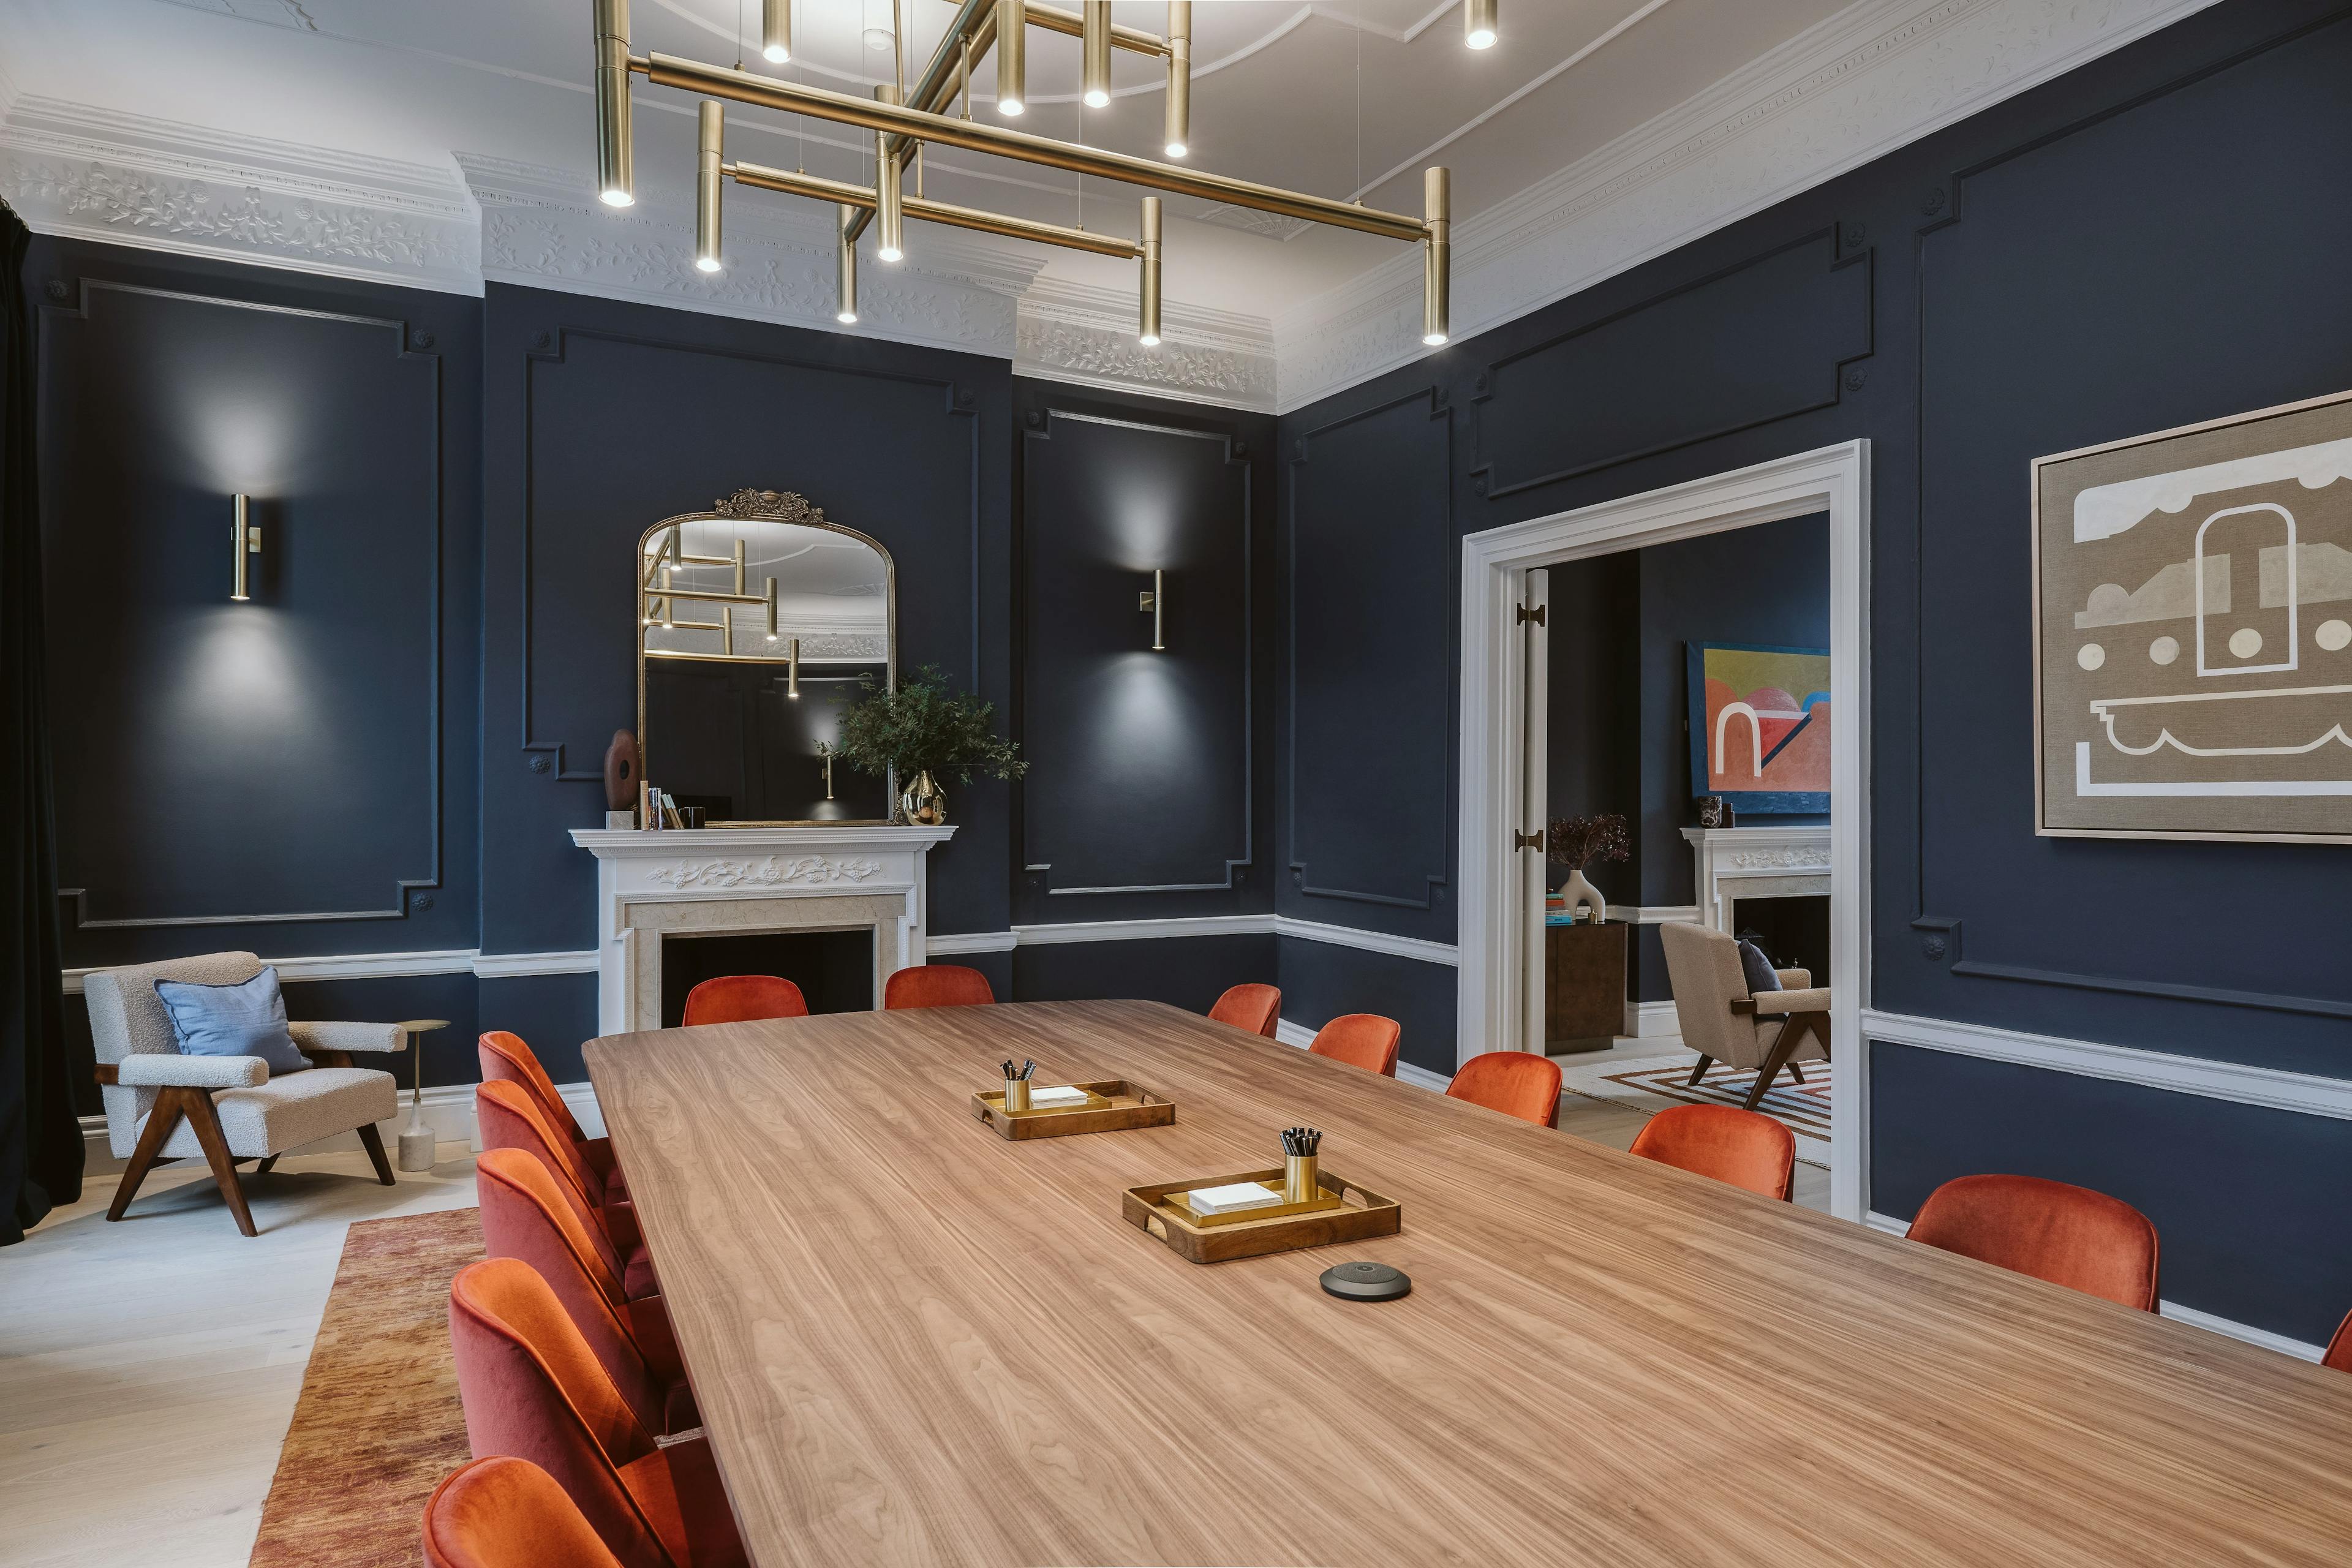 A boardroom at the Chief London clubhouse with a long wooden table, orange chairs, and two paintings by artists Kristin Texeira and Carla Weeks installed on dark blue walls.